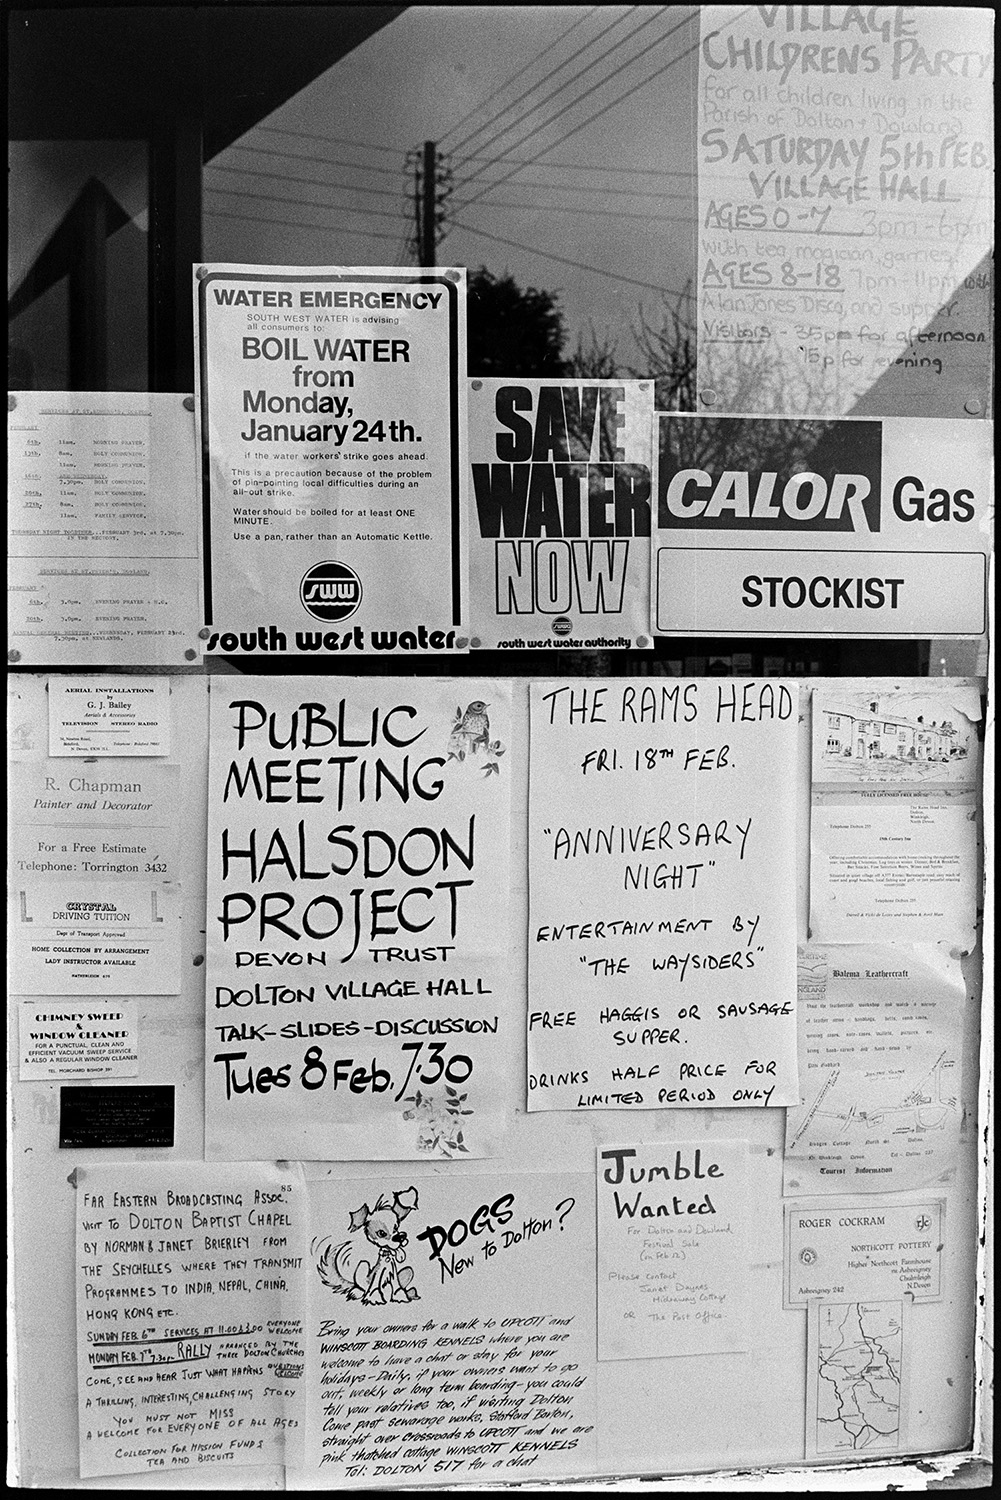 Posters, notices in Post Office window, events and meetings. <br />
[Notices in Beaford Post Office Window. Adverts for a Children's Party in the village hall, an Anniversary Night at The Rams Head pub, a meeting about the Halsdon Project and a notice from South West Water, are displayed amongst other adverts.]